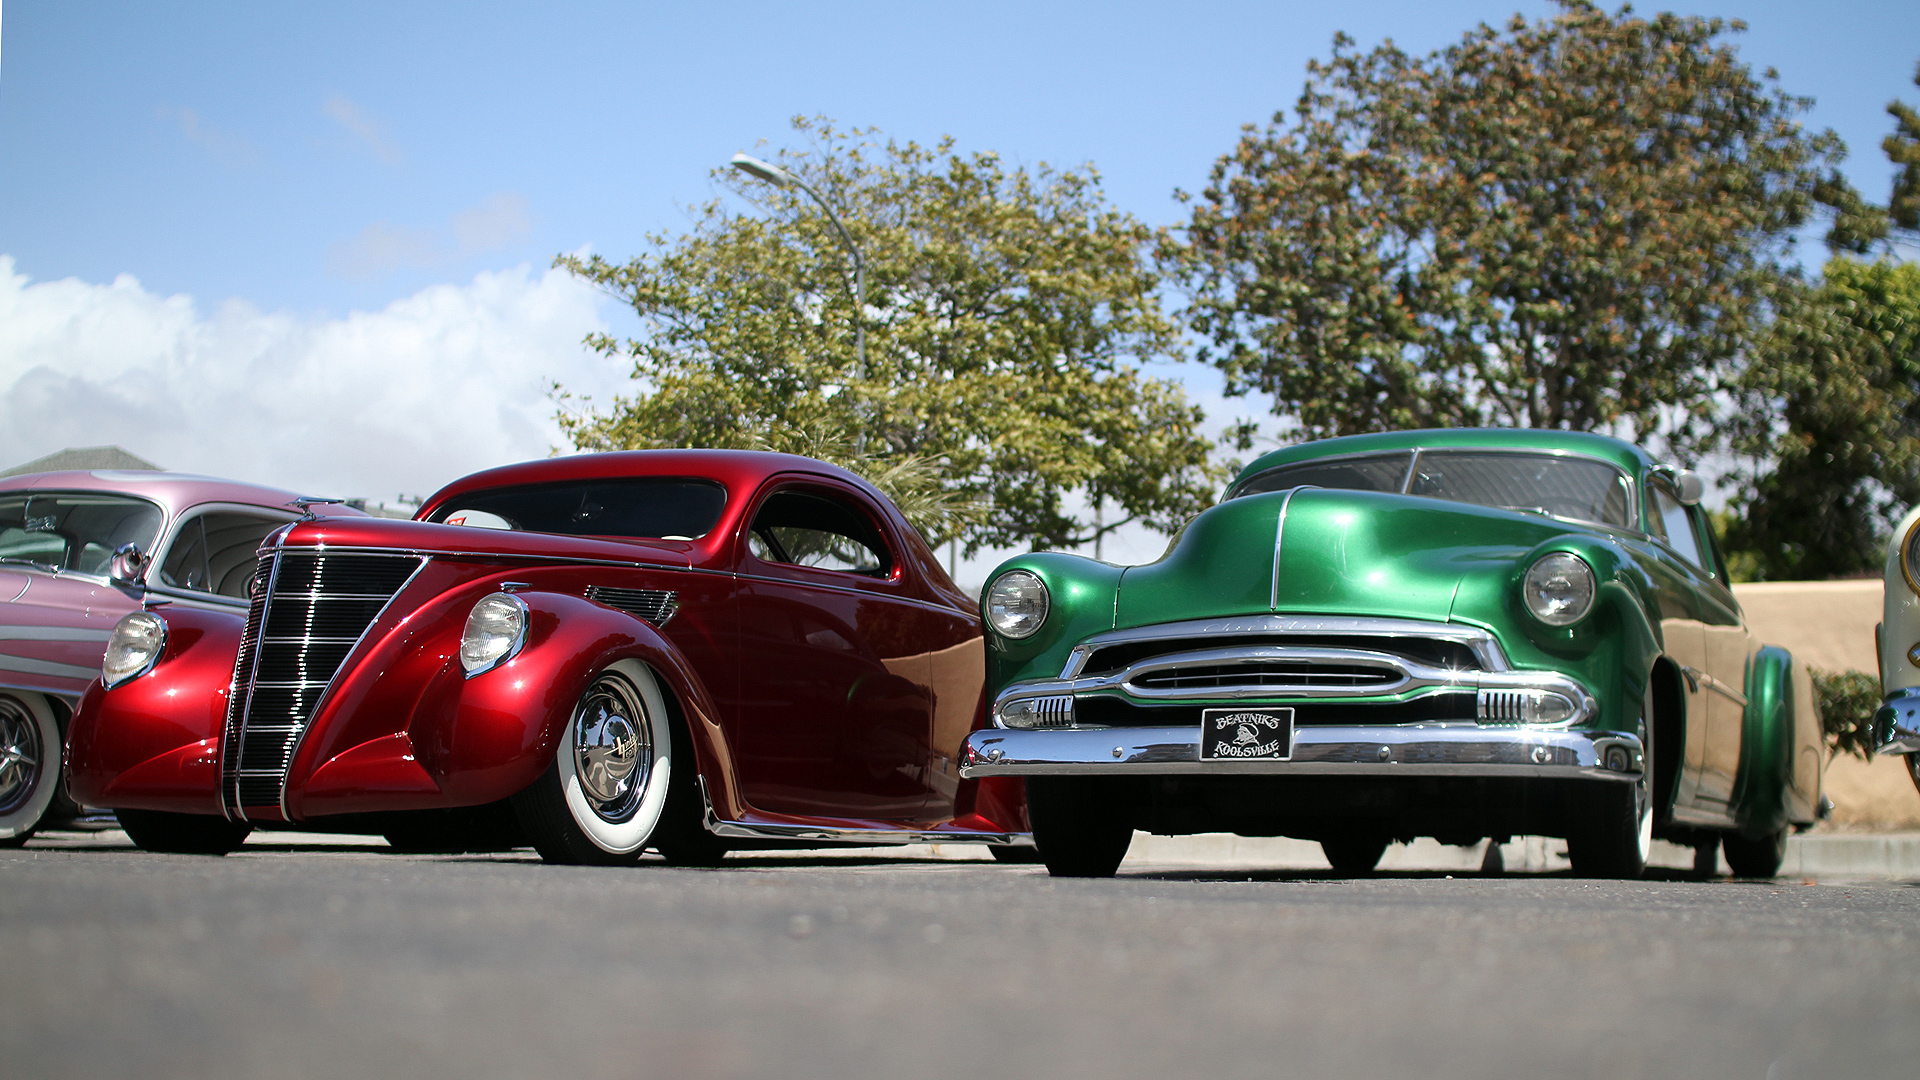 Top Old Cars Vintage HD Wallpaper ImgHD Browse And